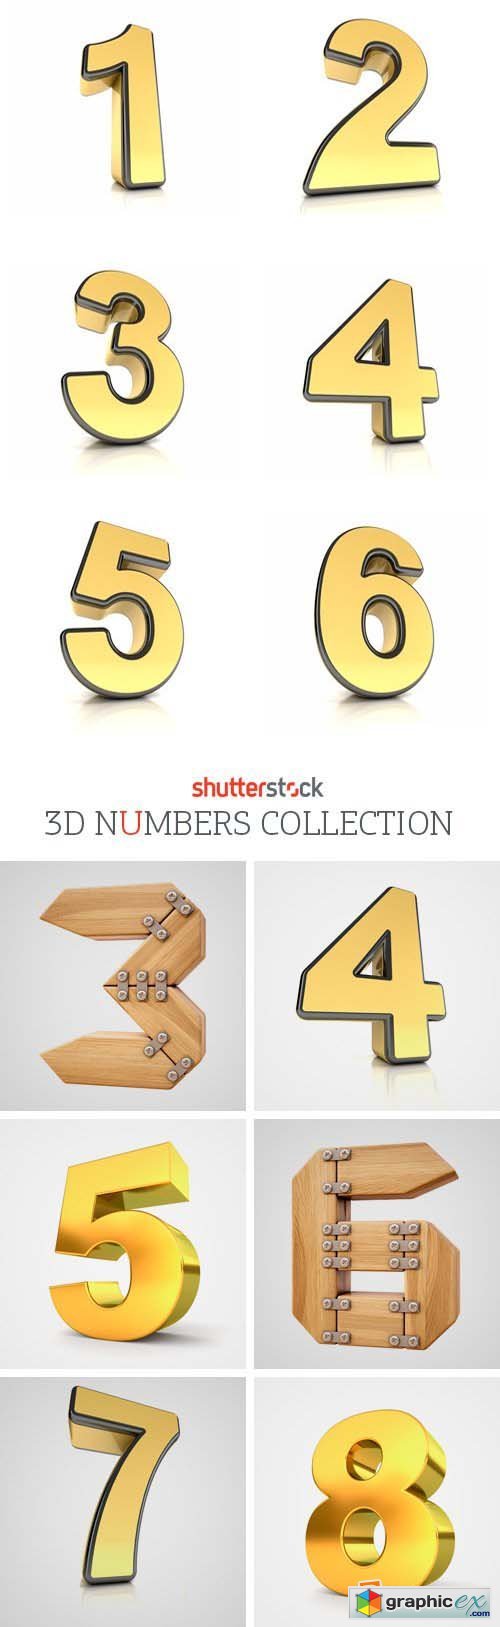 Amazing SS - 3D Numbers Collection, 30xJPGs